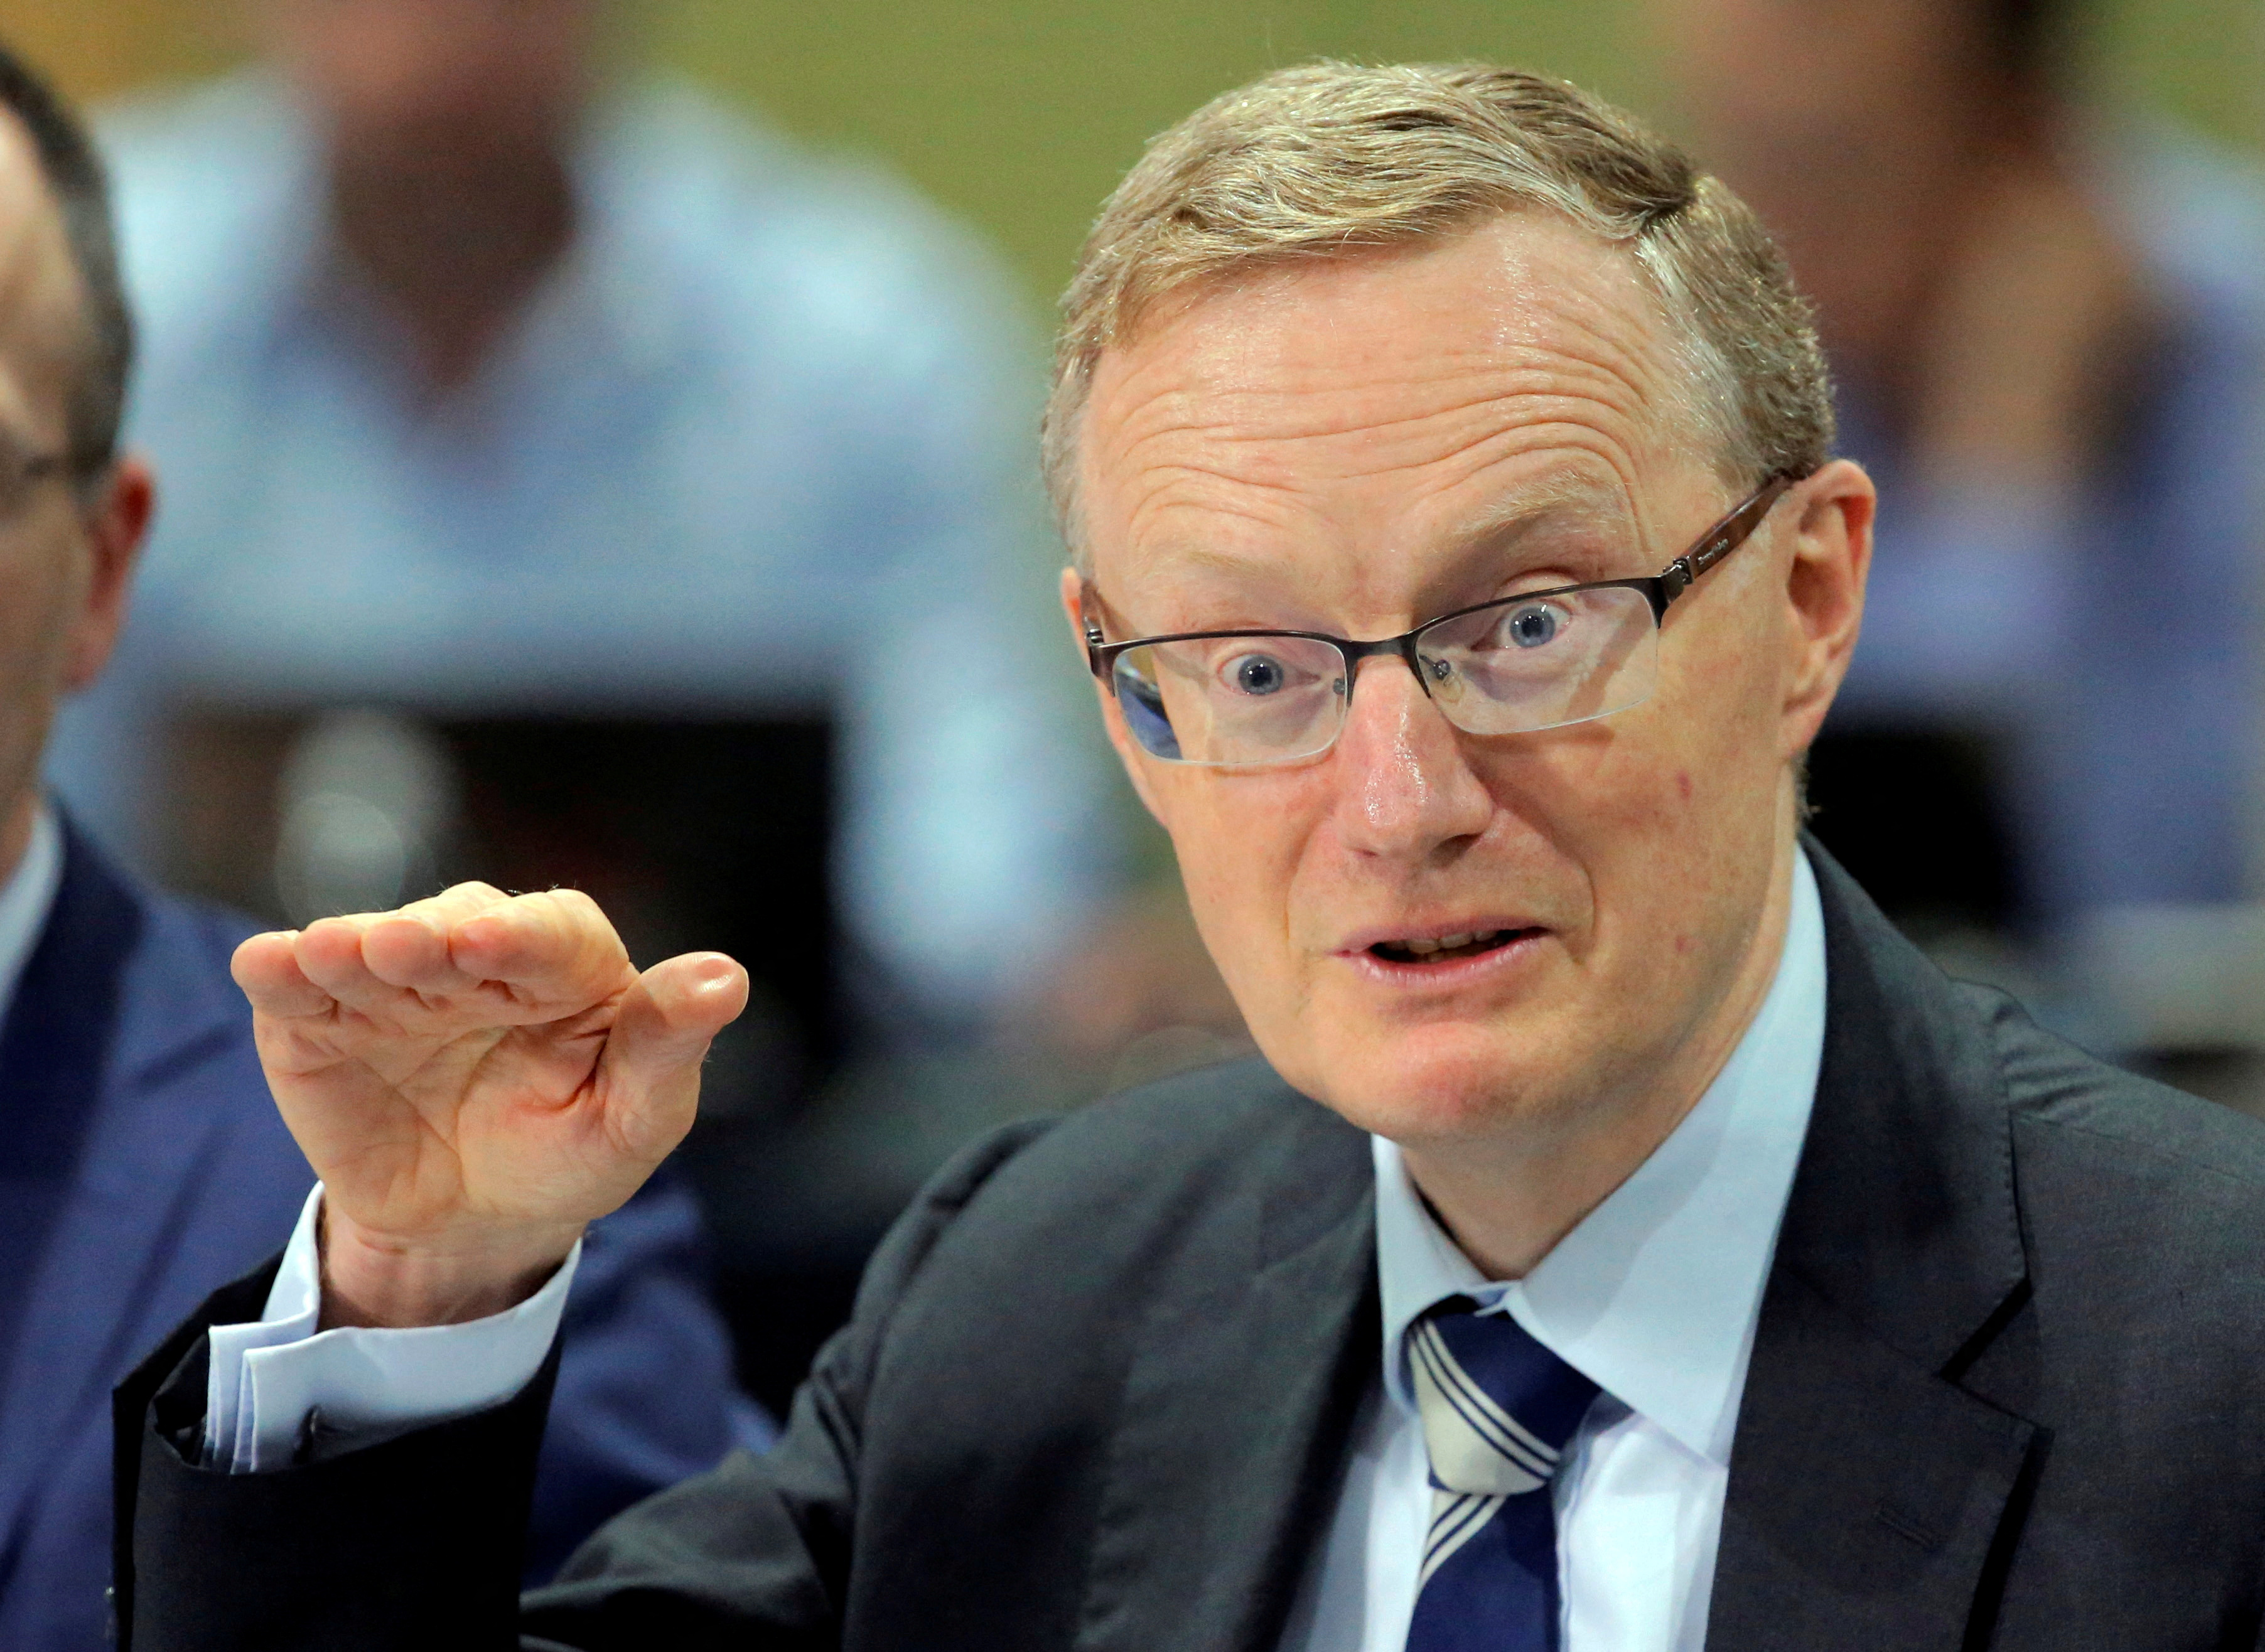 Australia's new Reserve Bank of Australia (RBA) Governor Philip Lowe speaks at a parliamentary economics committee meeting in Sydney